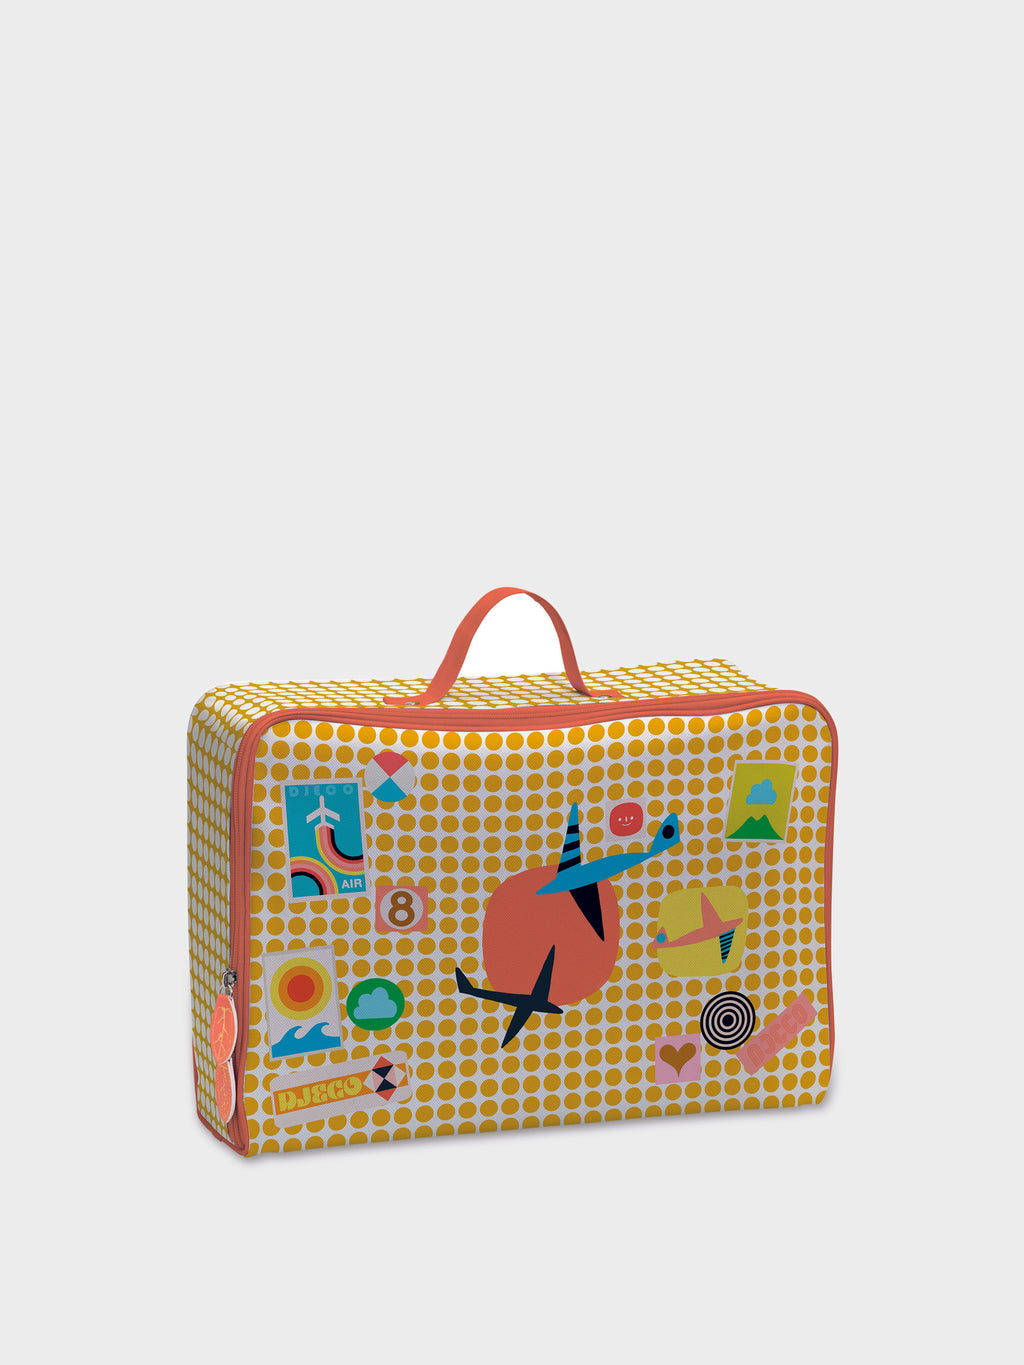 Orange suitcase for kids with prints and polka dots